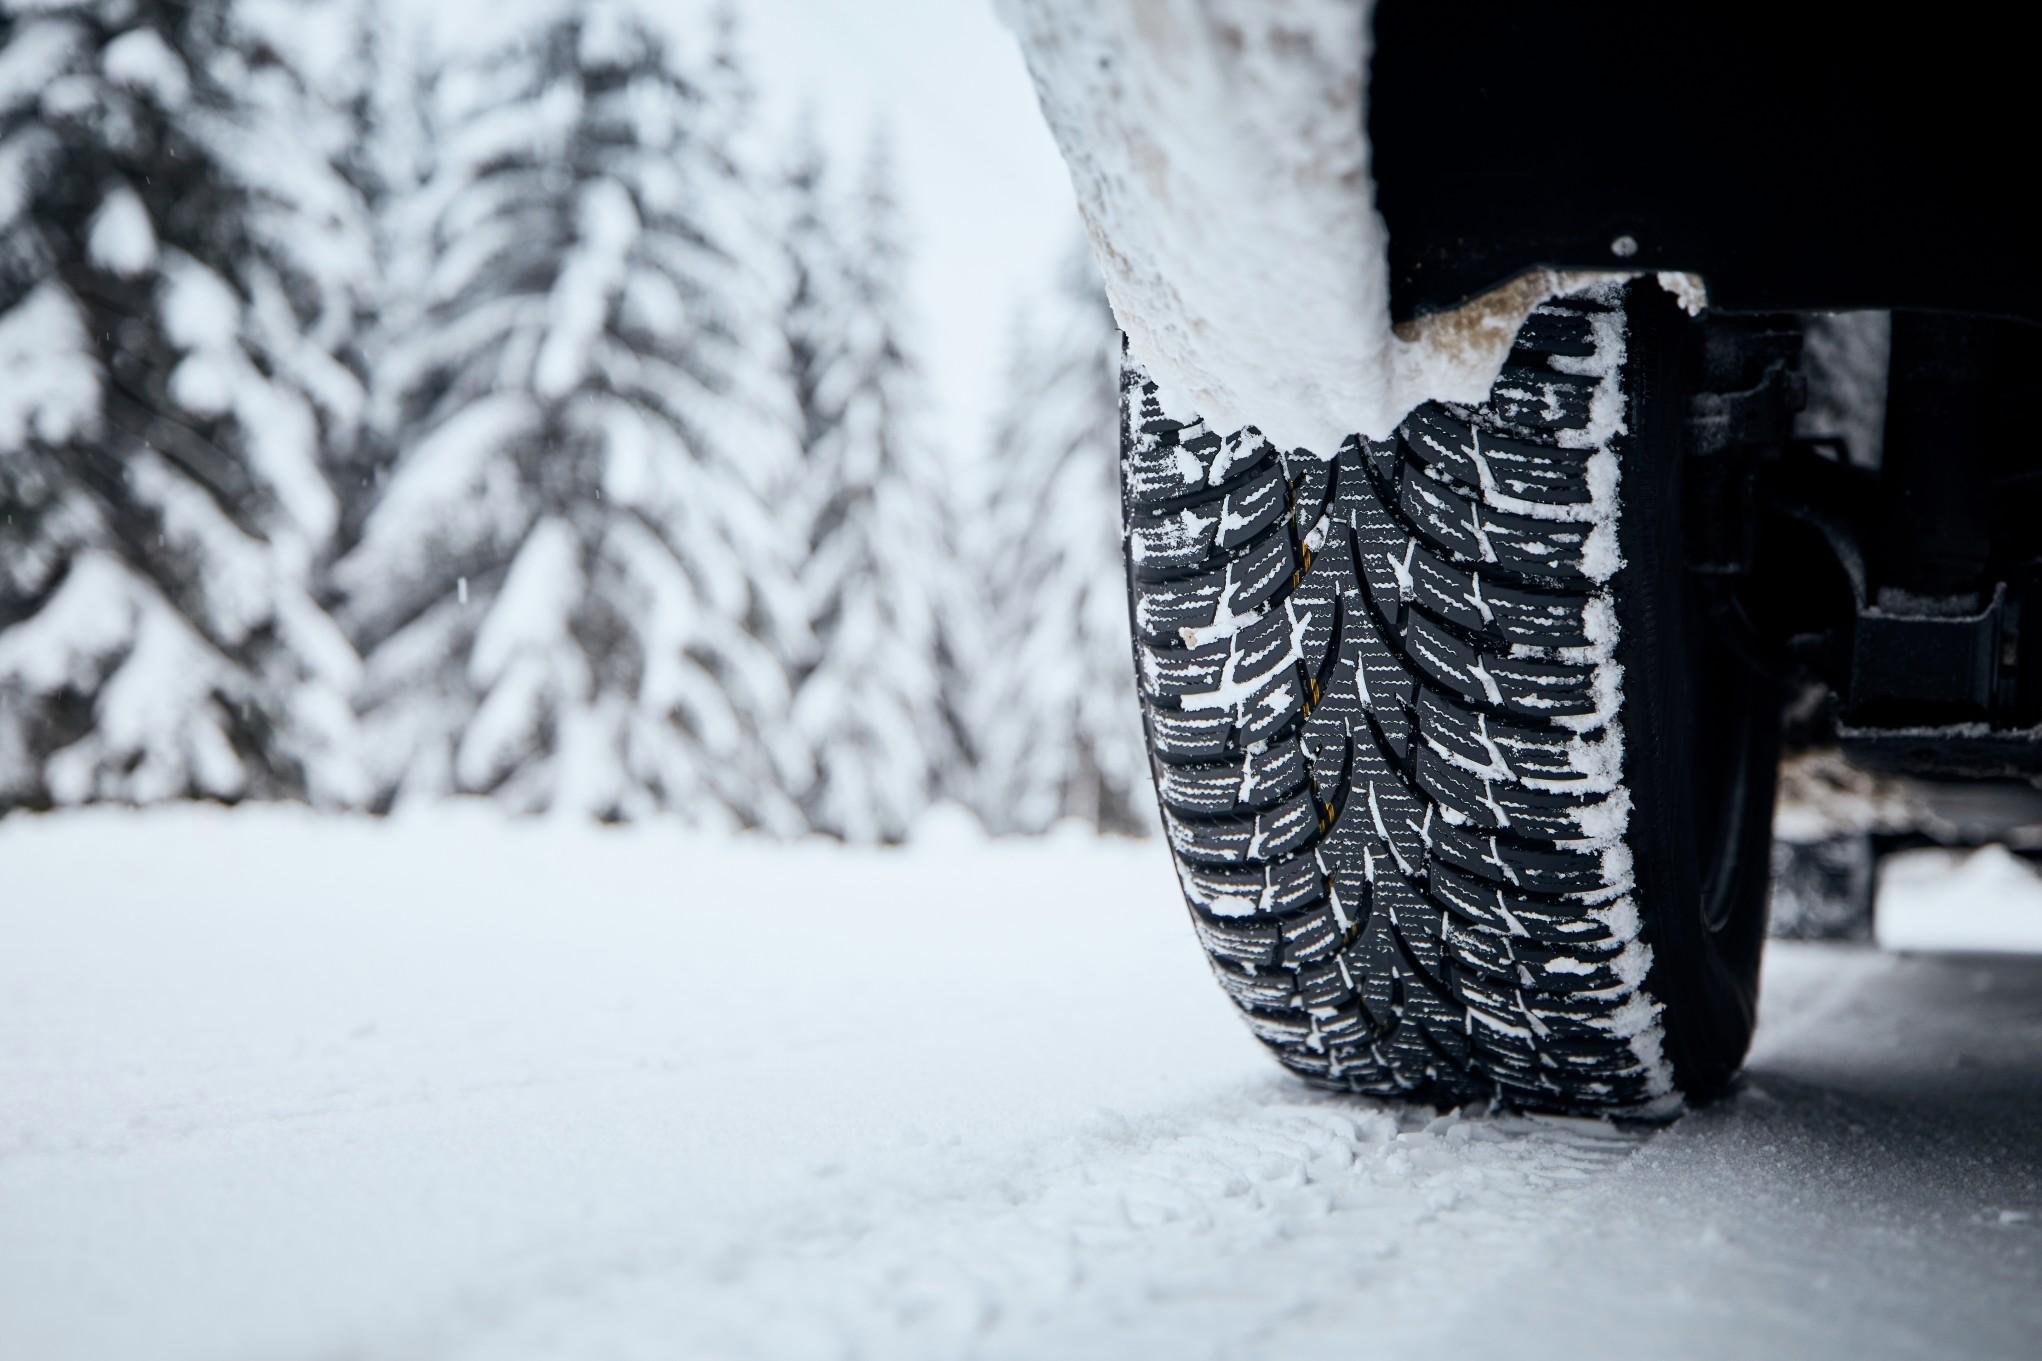 Winter is coming, so you may want an SUV that can handle snowy conditions.